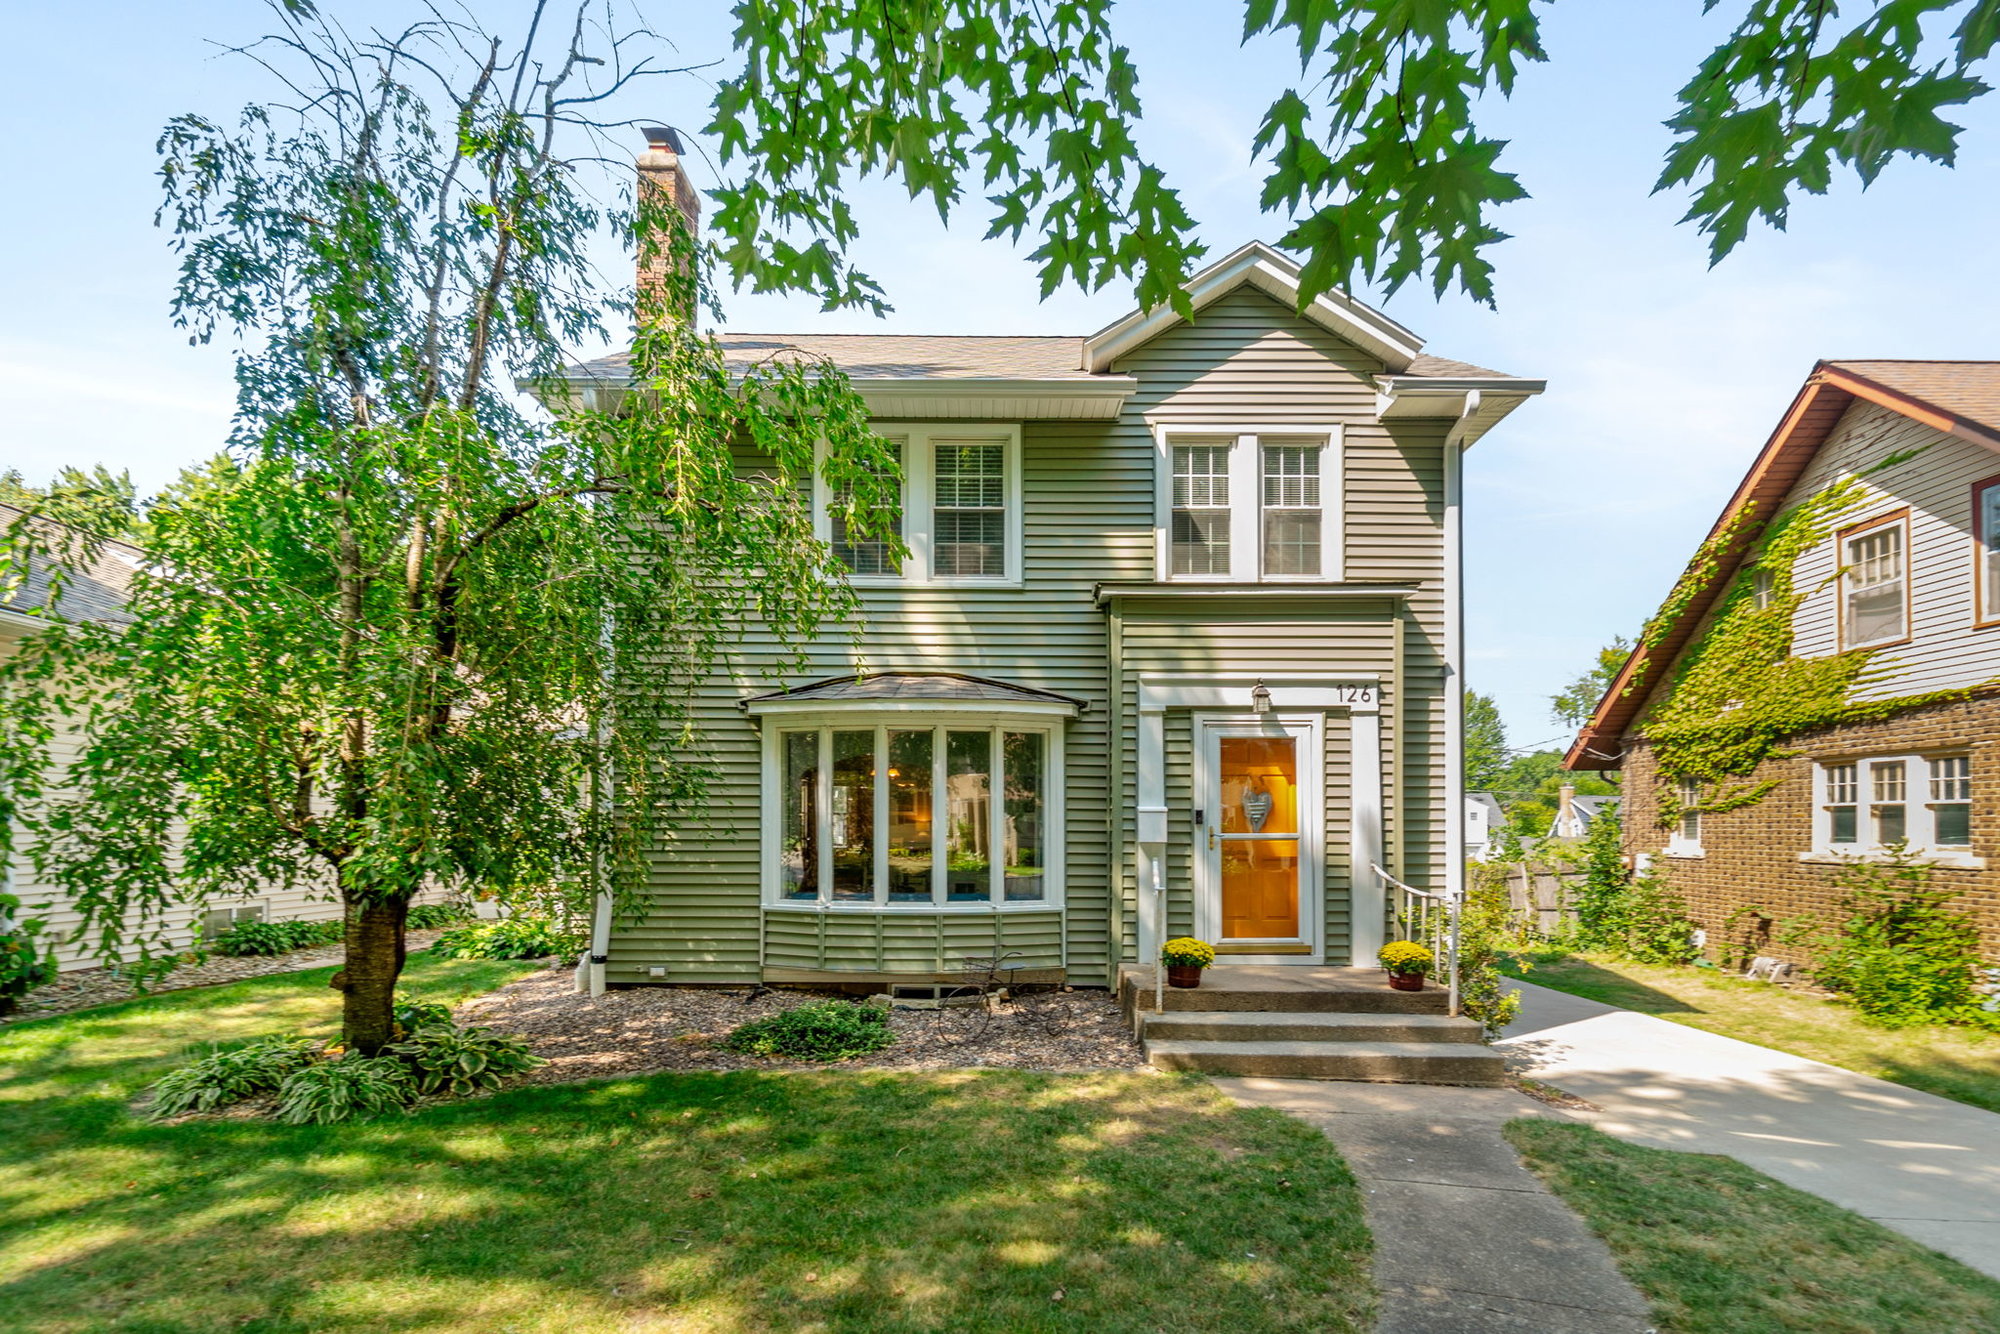 The Charming & Character-Filled Home in the Prospect area of Waterloo Iowa | Oakridge Real Estate